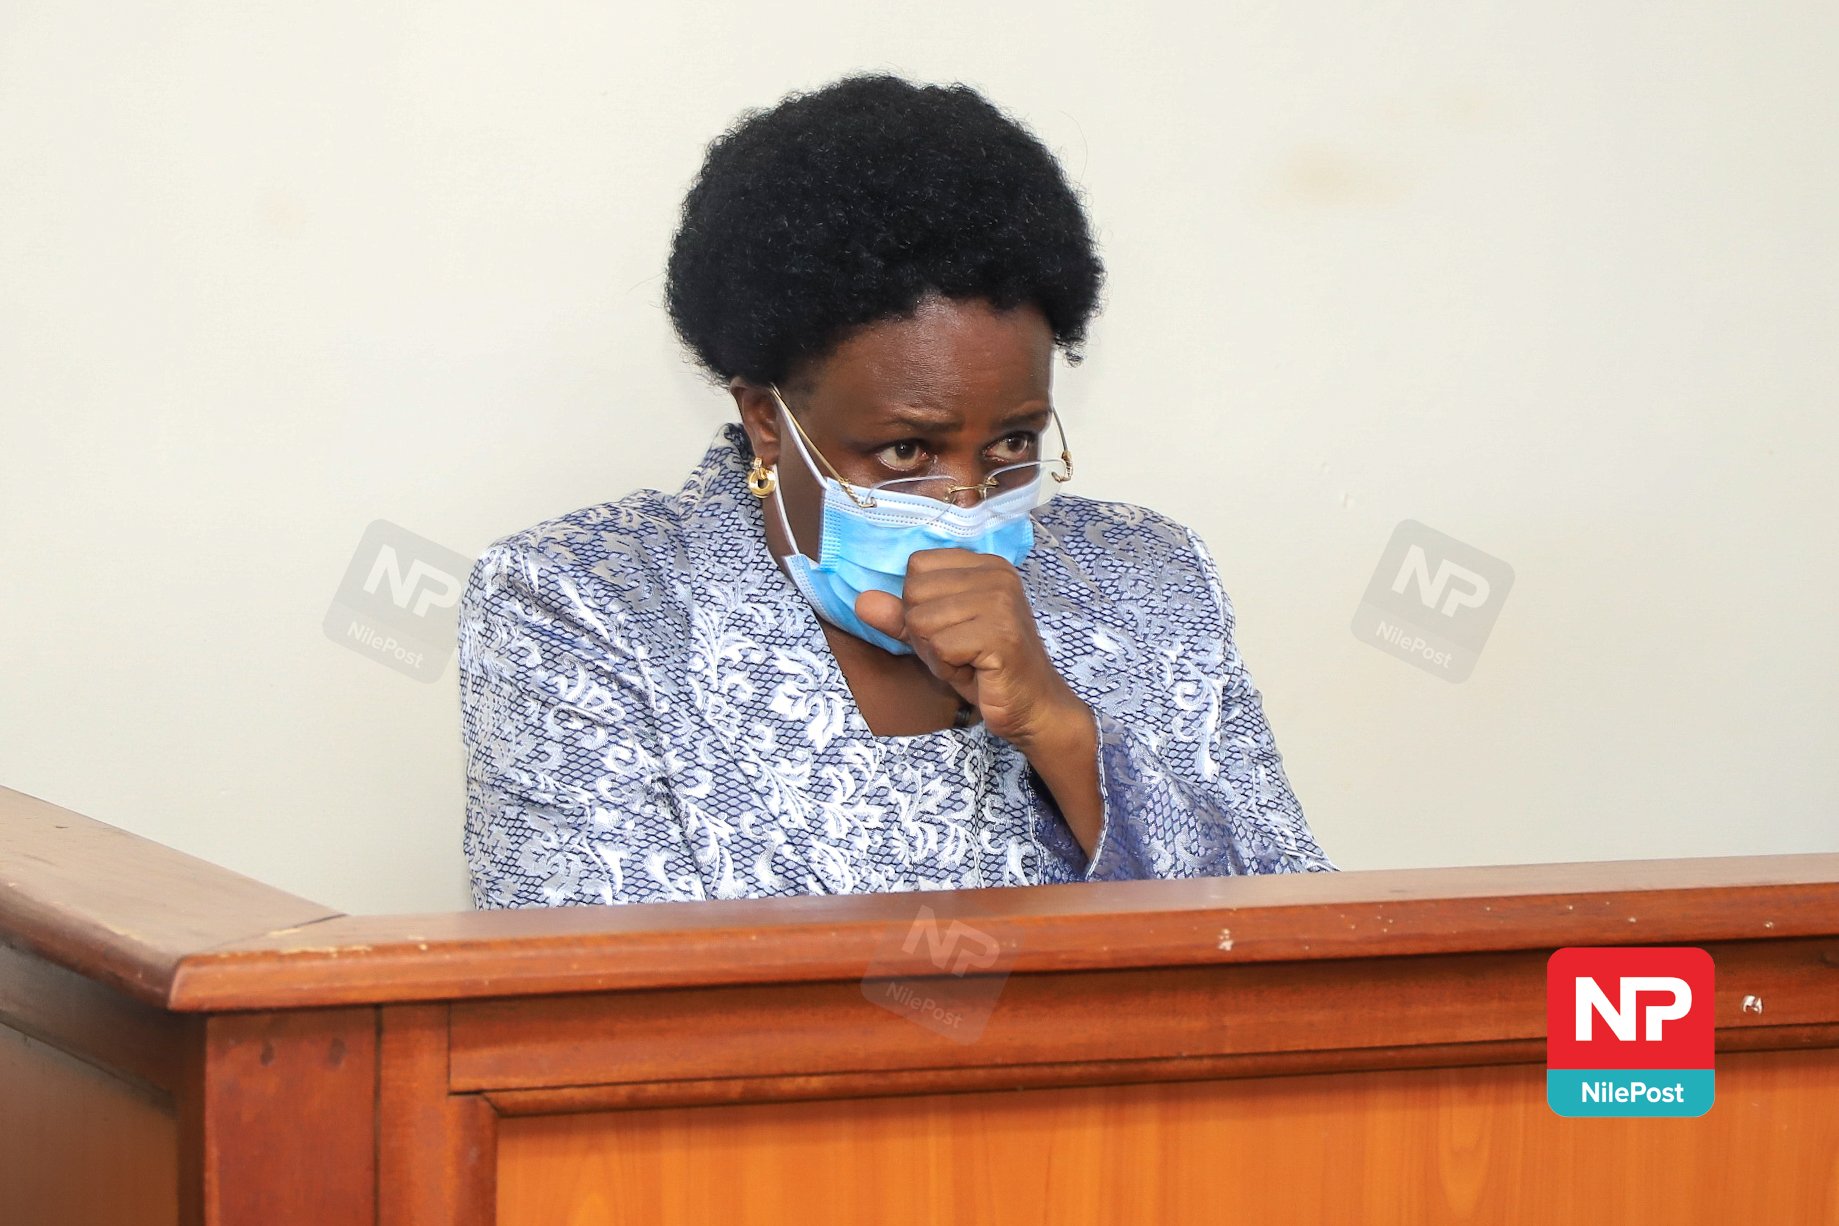 Kitutu iron sheets case hits wall as minister claims her human rights were violated 